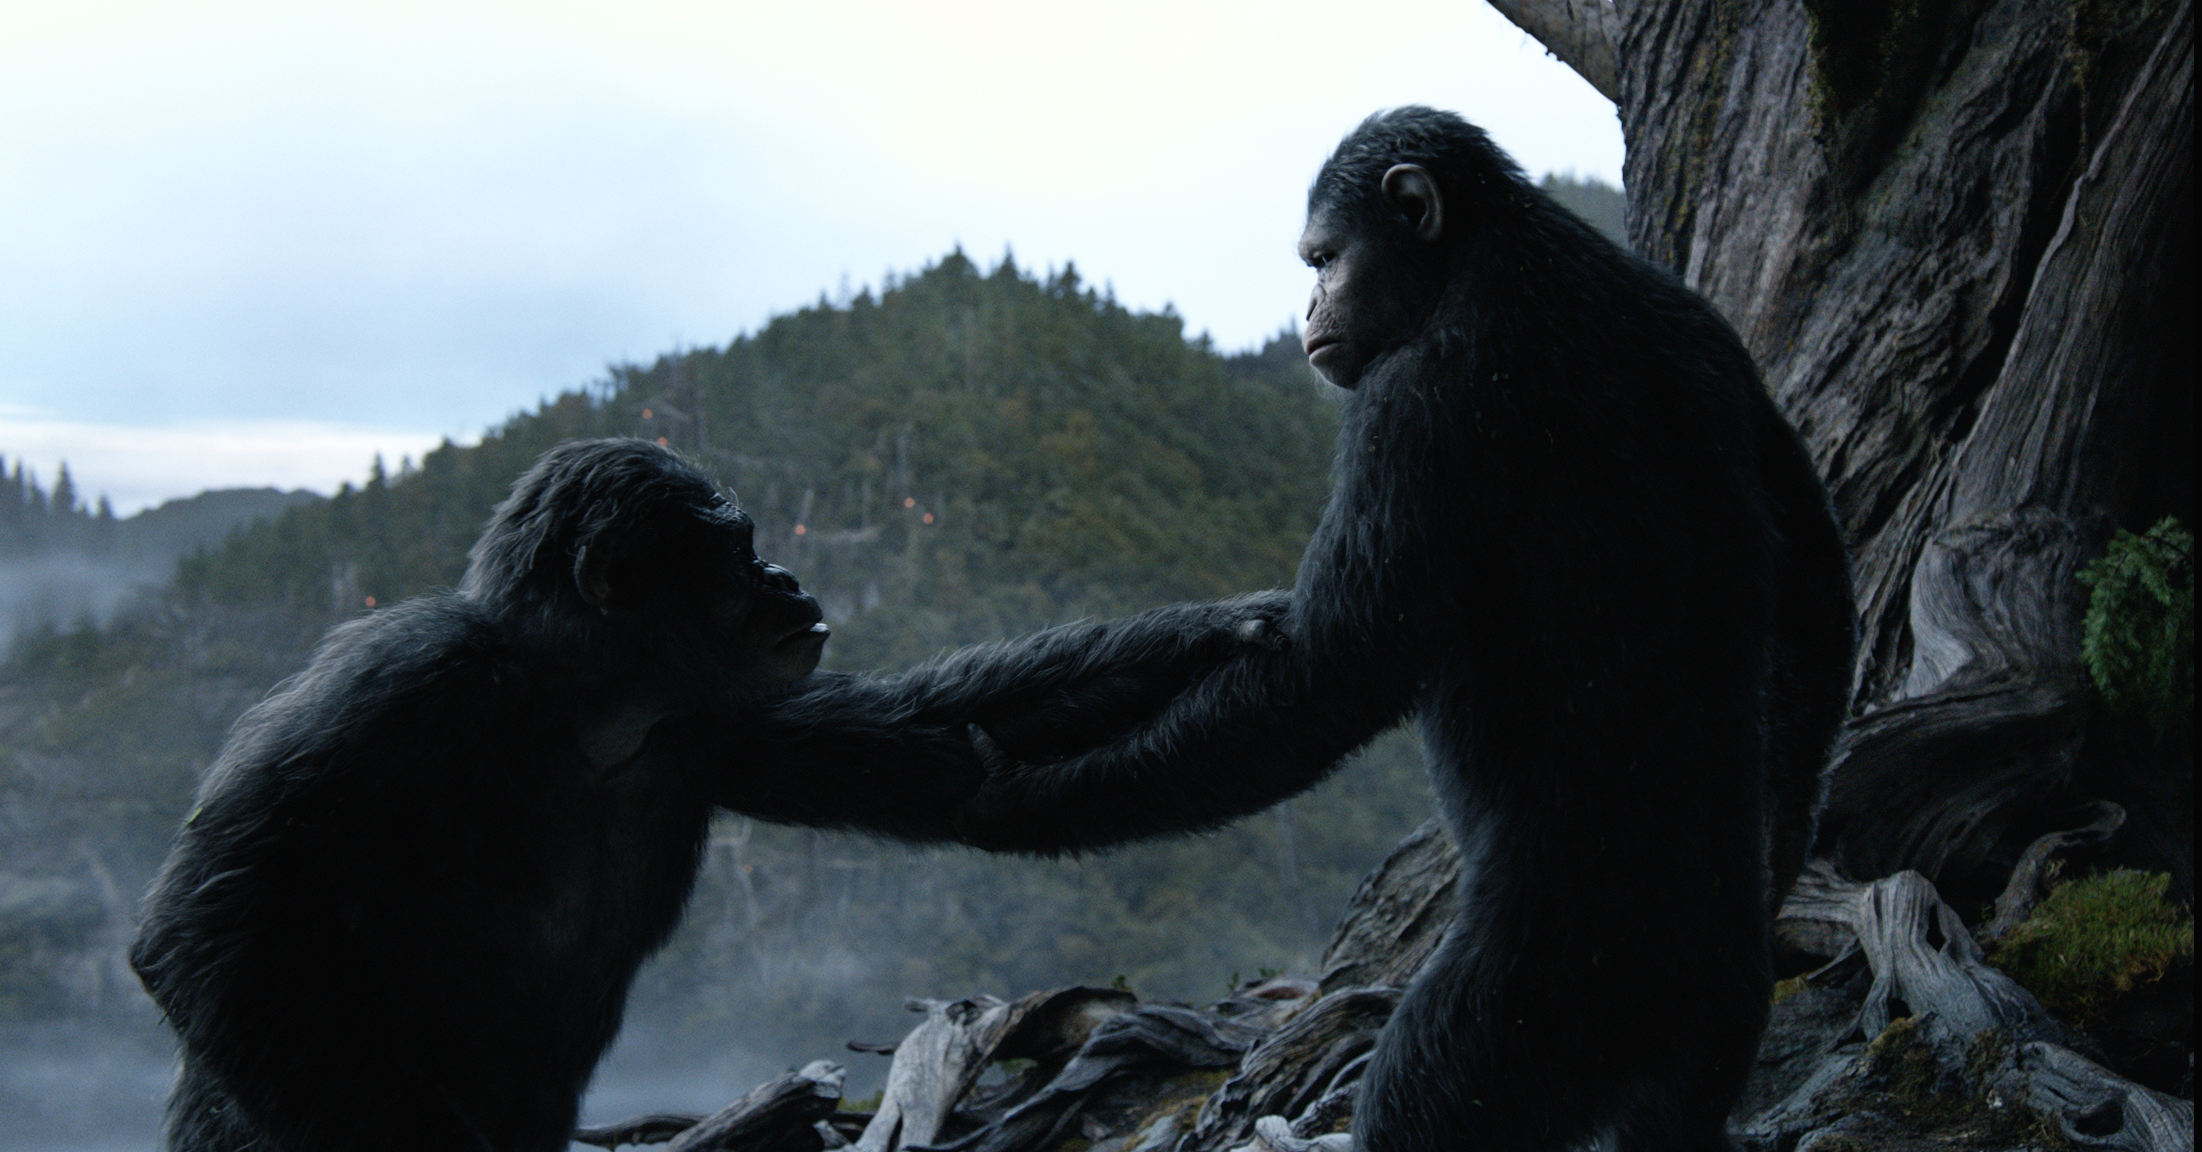 Dawn of the planet of the apes - hands